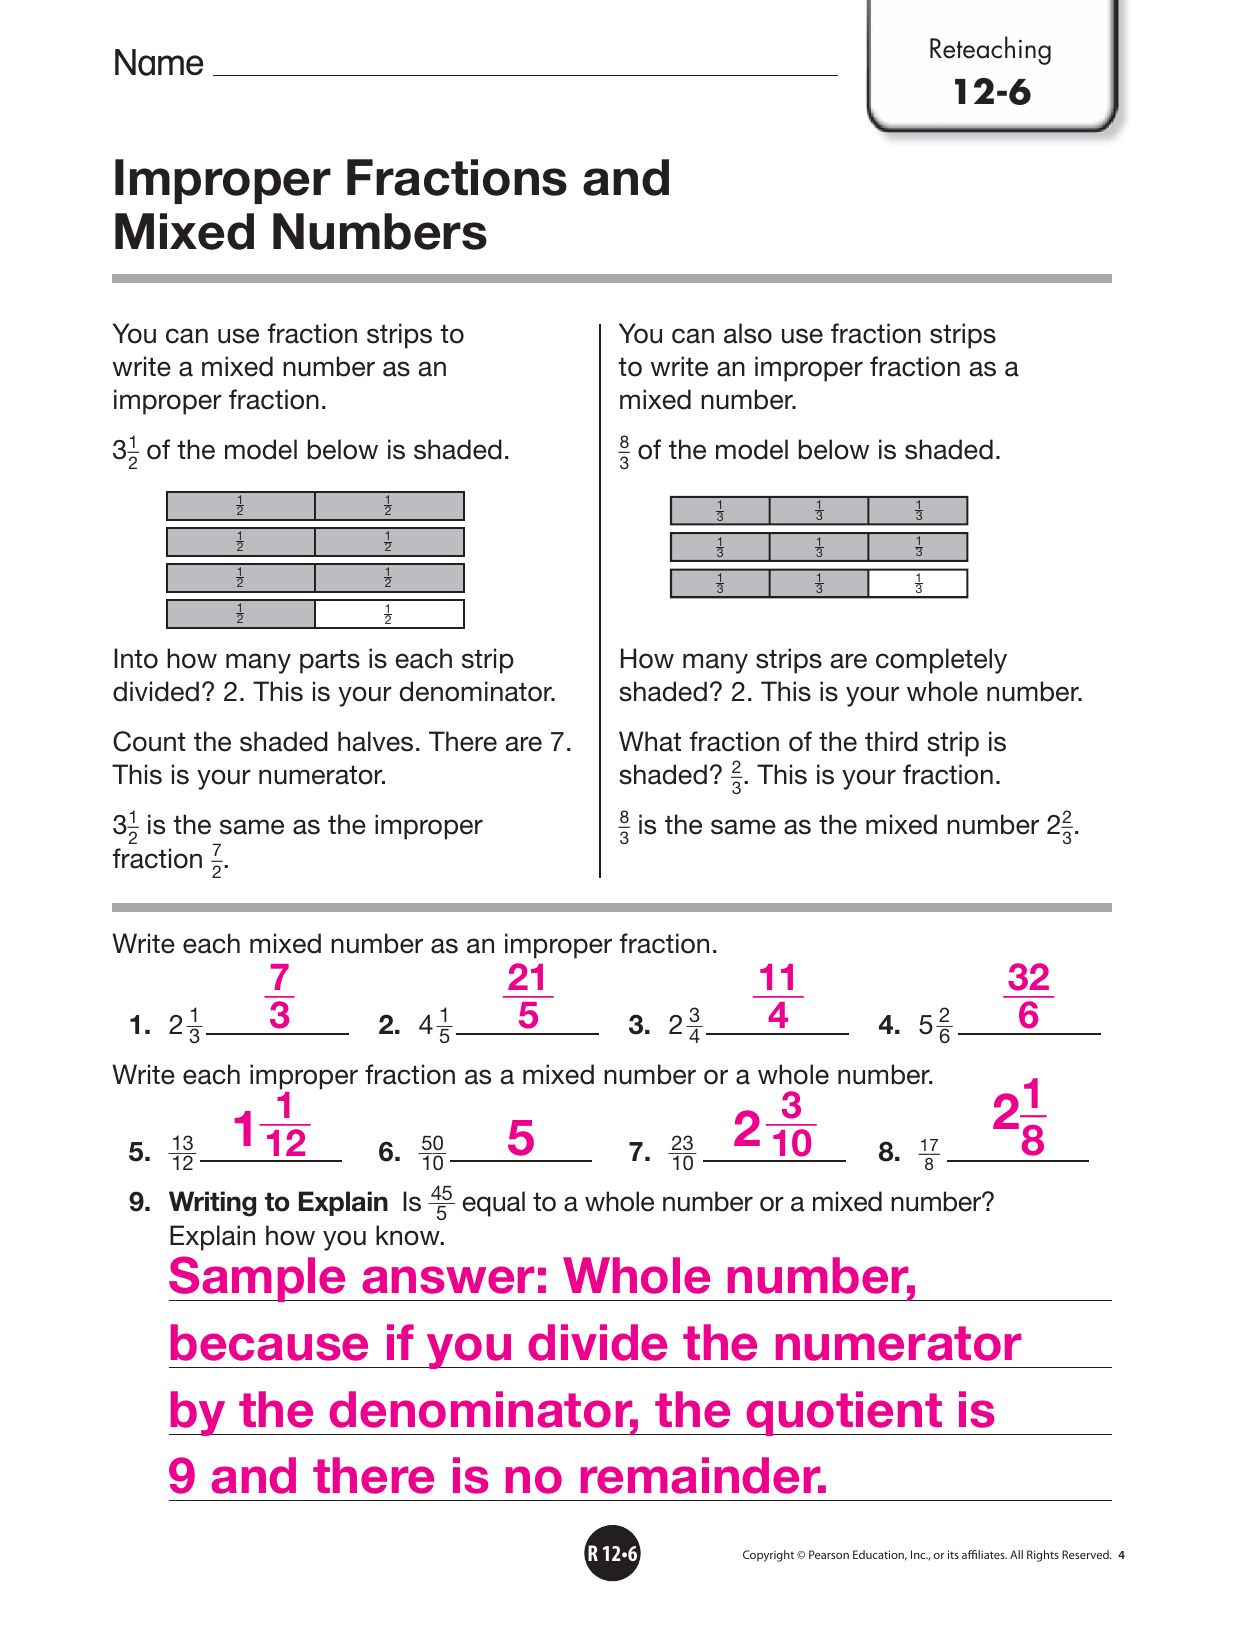 How to write a improper fraction as a whole number Improper Fractions And Mixed Numbers